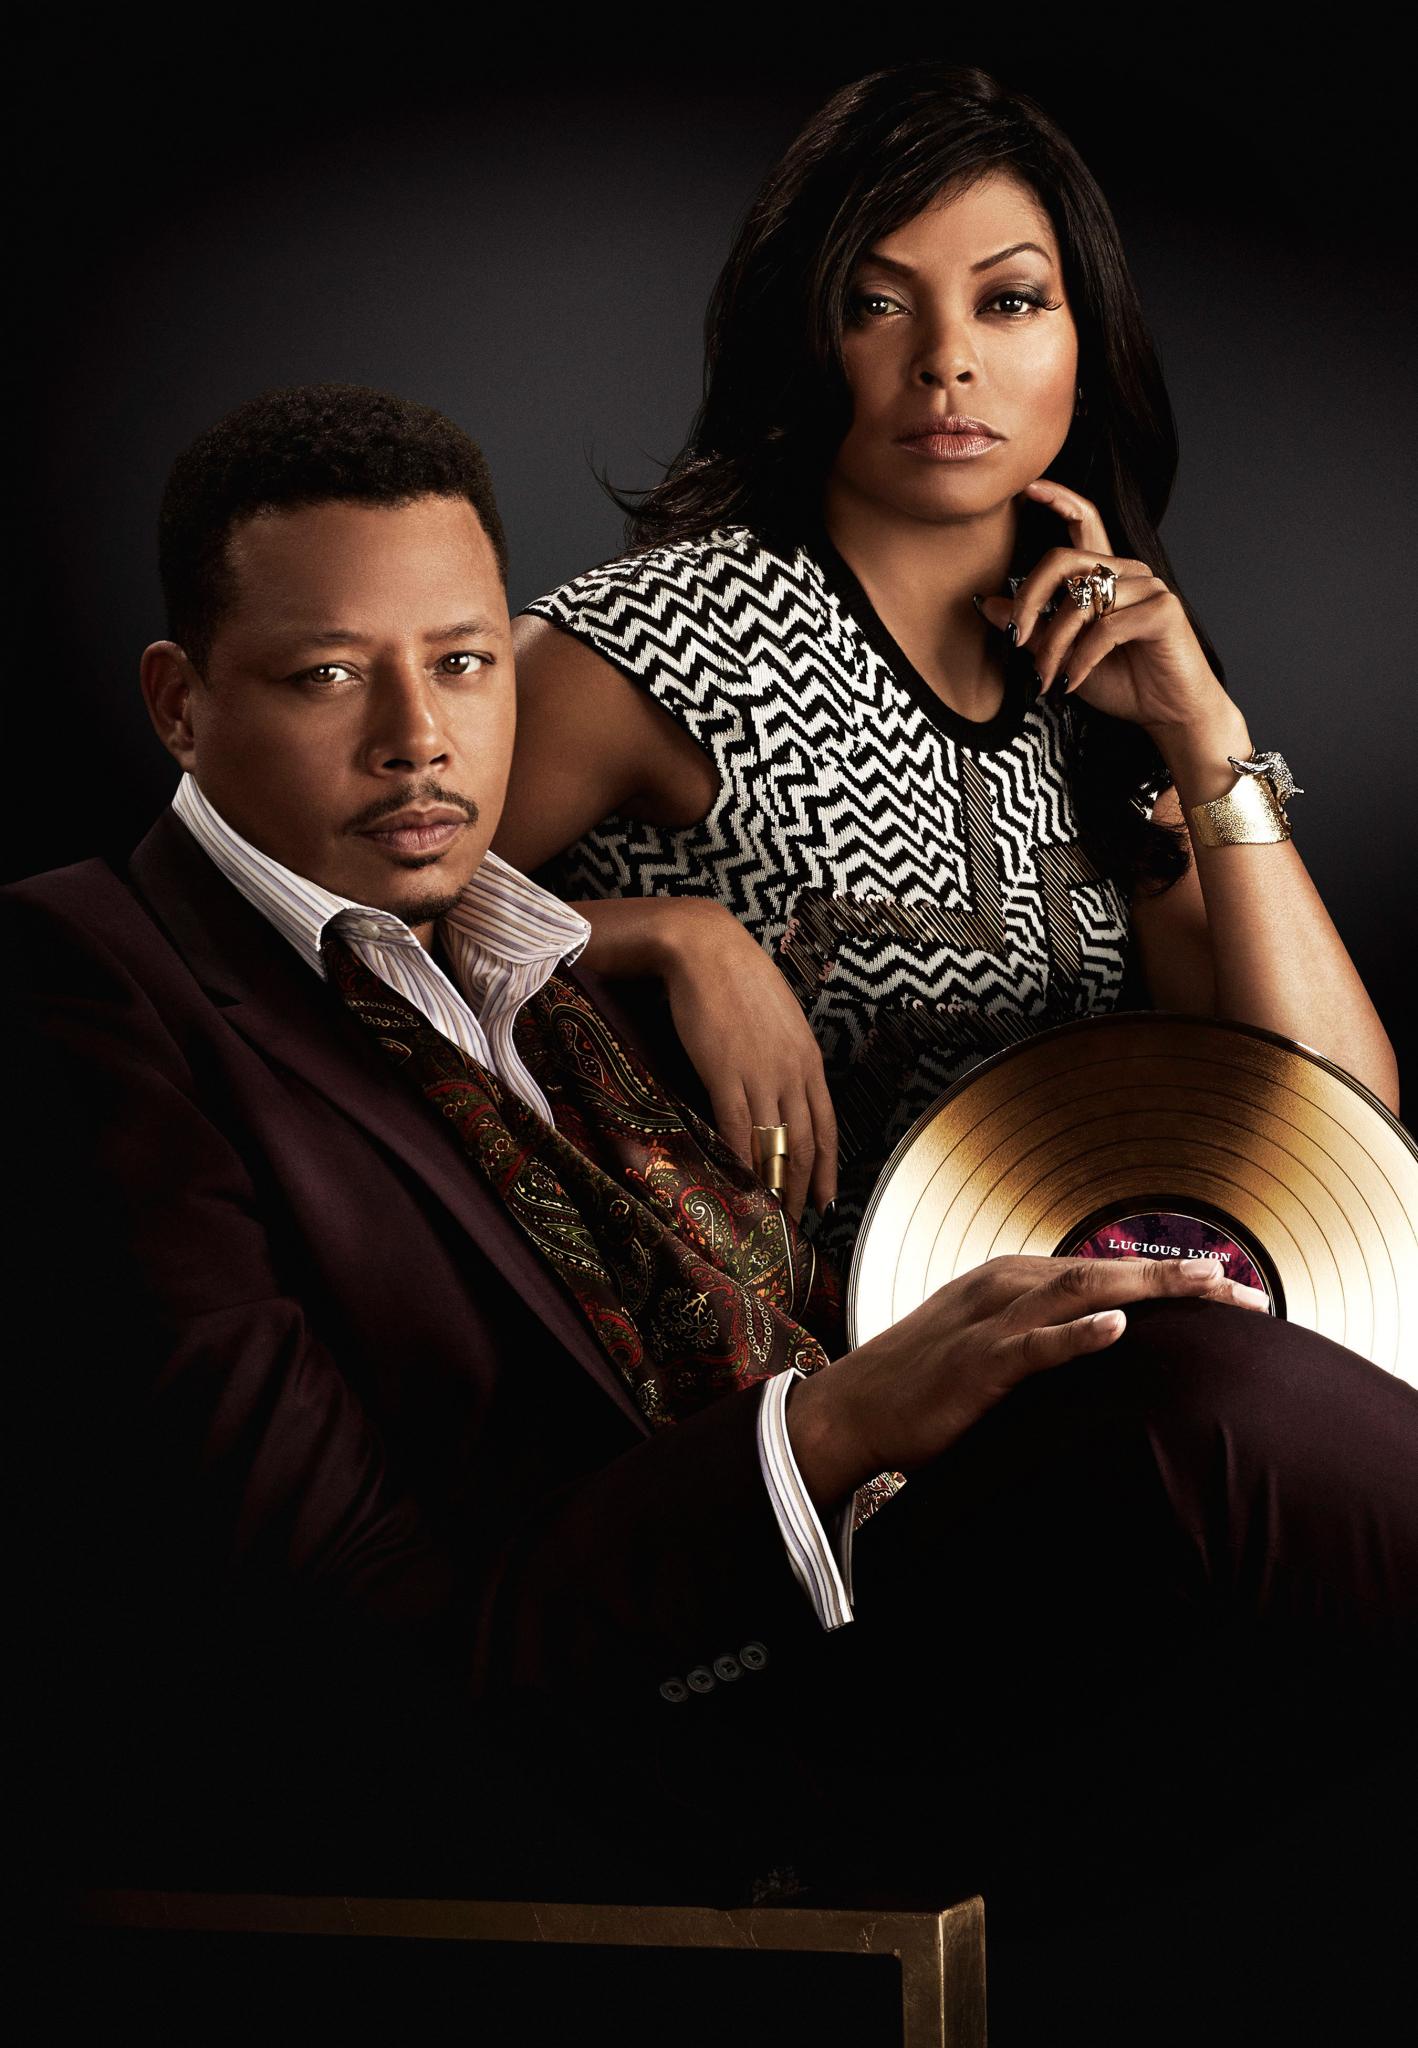 How the 'Empire' Strikes Black Love and Family Values
